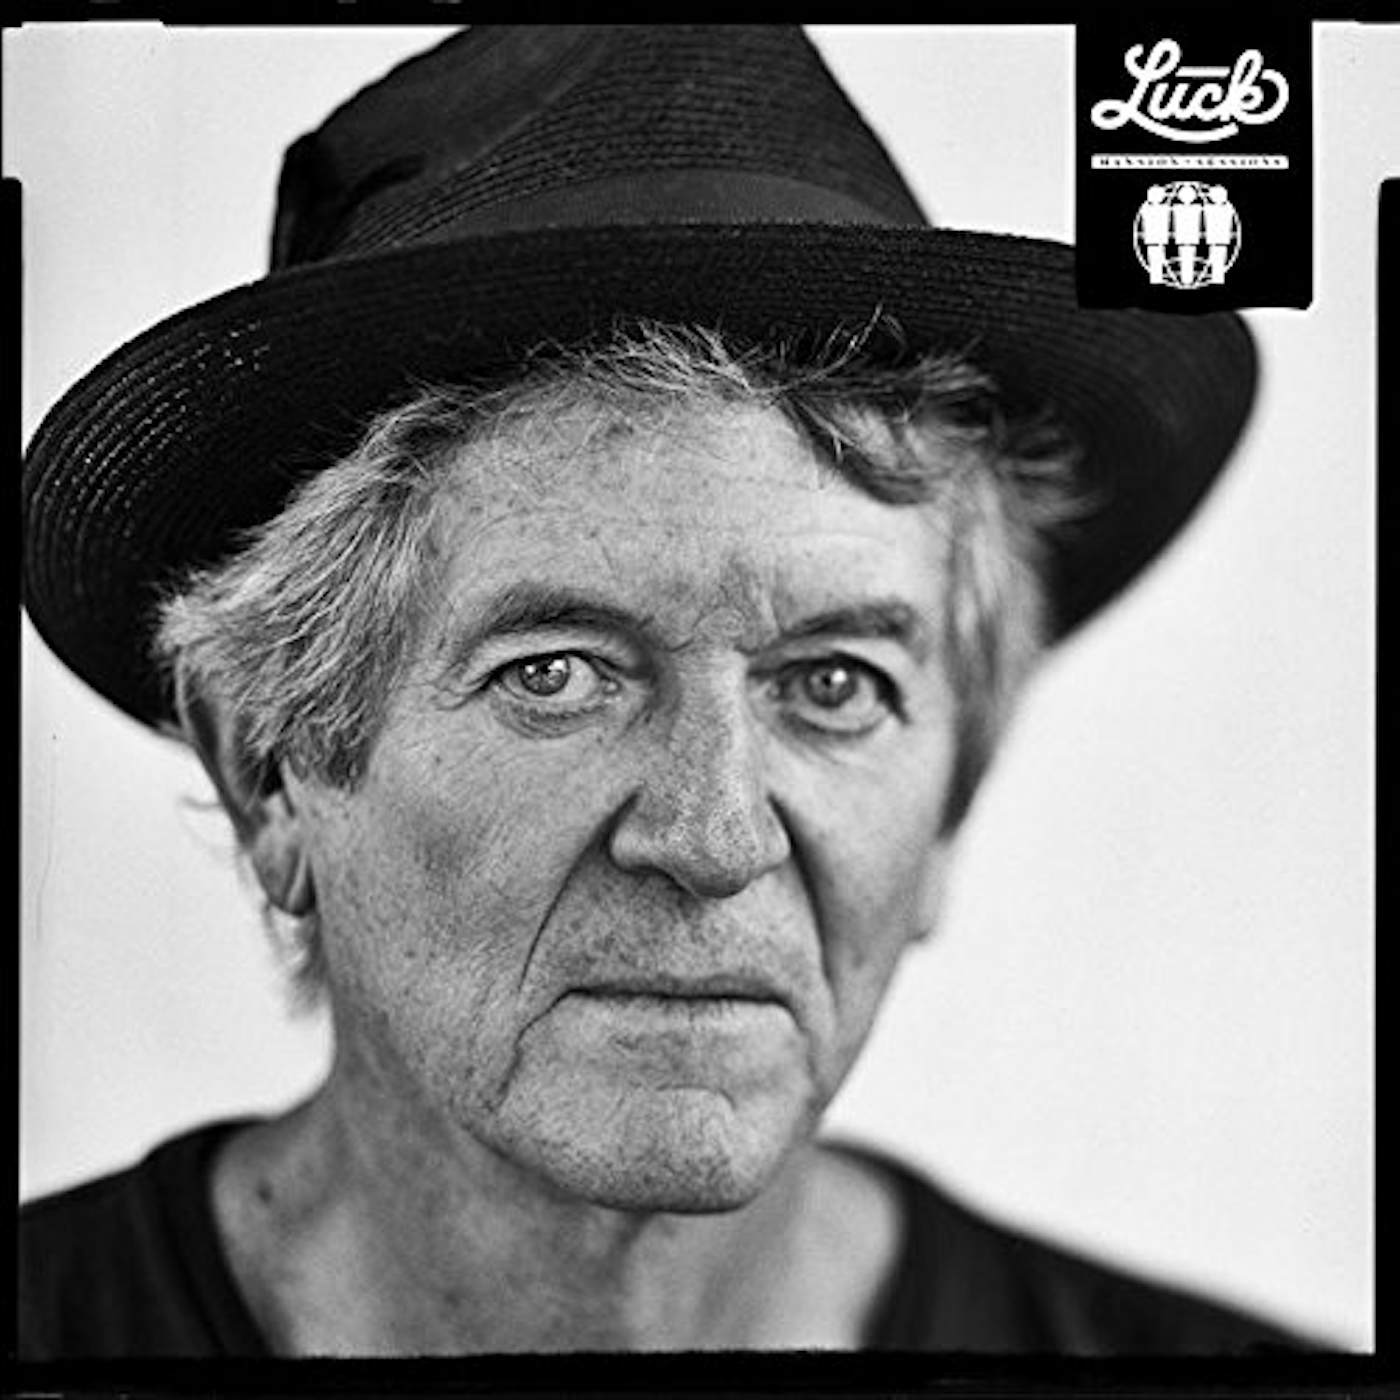 Rodney Crowell Luck Mansion Sessions Vinyl Record